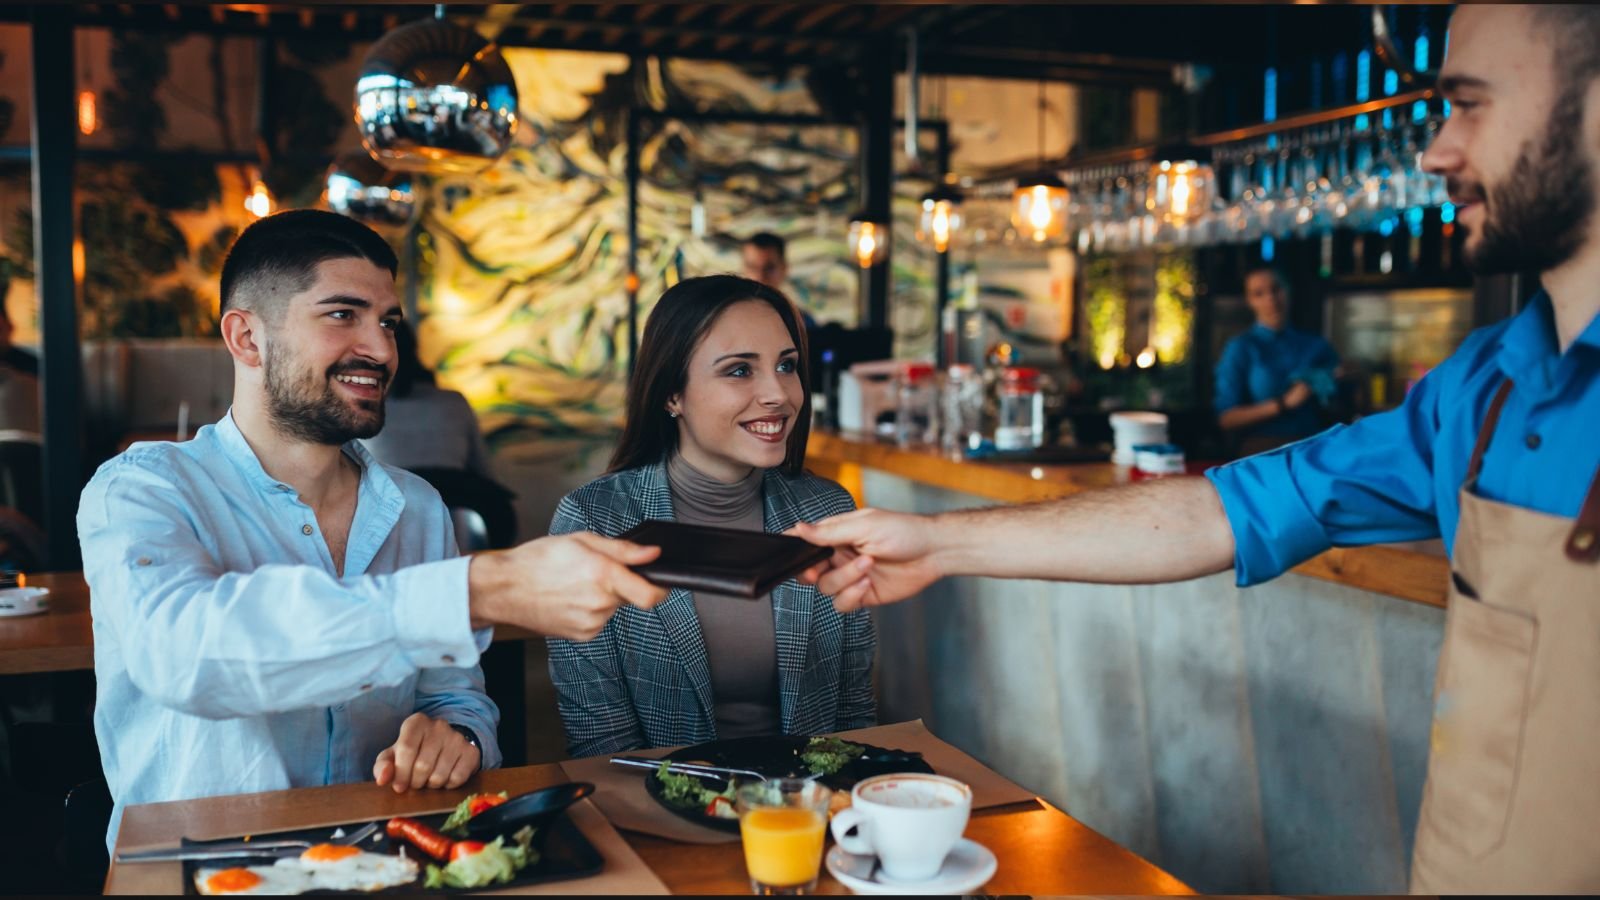 <p><span>You do not tip at restaurants or tip well below the standard rate of </span><a href="https://www.qantas.com/travelinsider/en/travel-tips/gratuities-and-tipping-in-america.html#:~:text=How%20much%20should%20I%20tip,the%20extra%20mile%20for%20customers." rel="noopener"><span>20 to 25%</span></a><span> on the bill. This behavior shows hesitation in acknowledging the service you receive, and it can be considered an act of cheapness.</span></p>